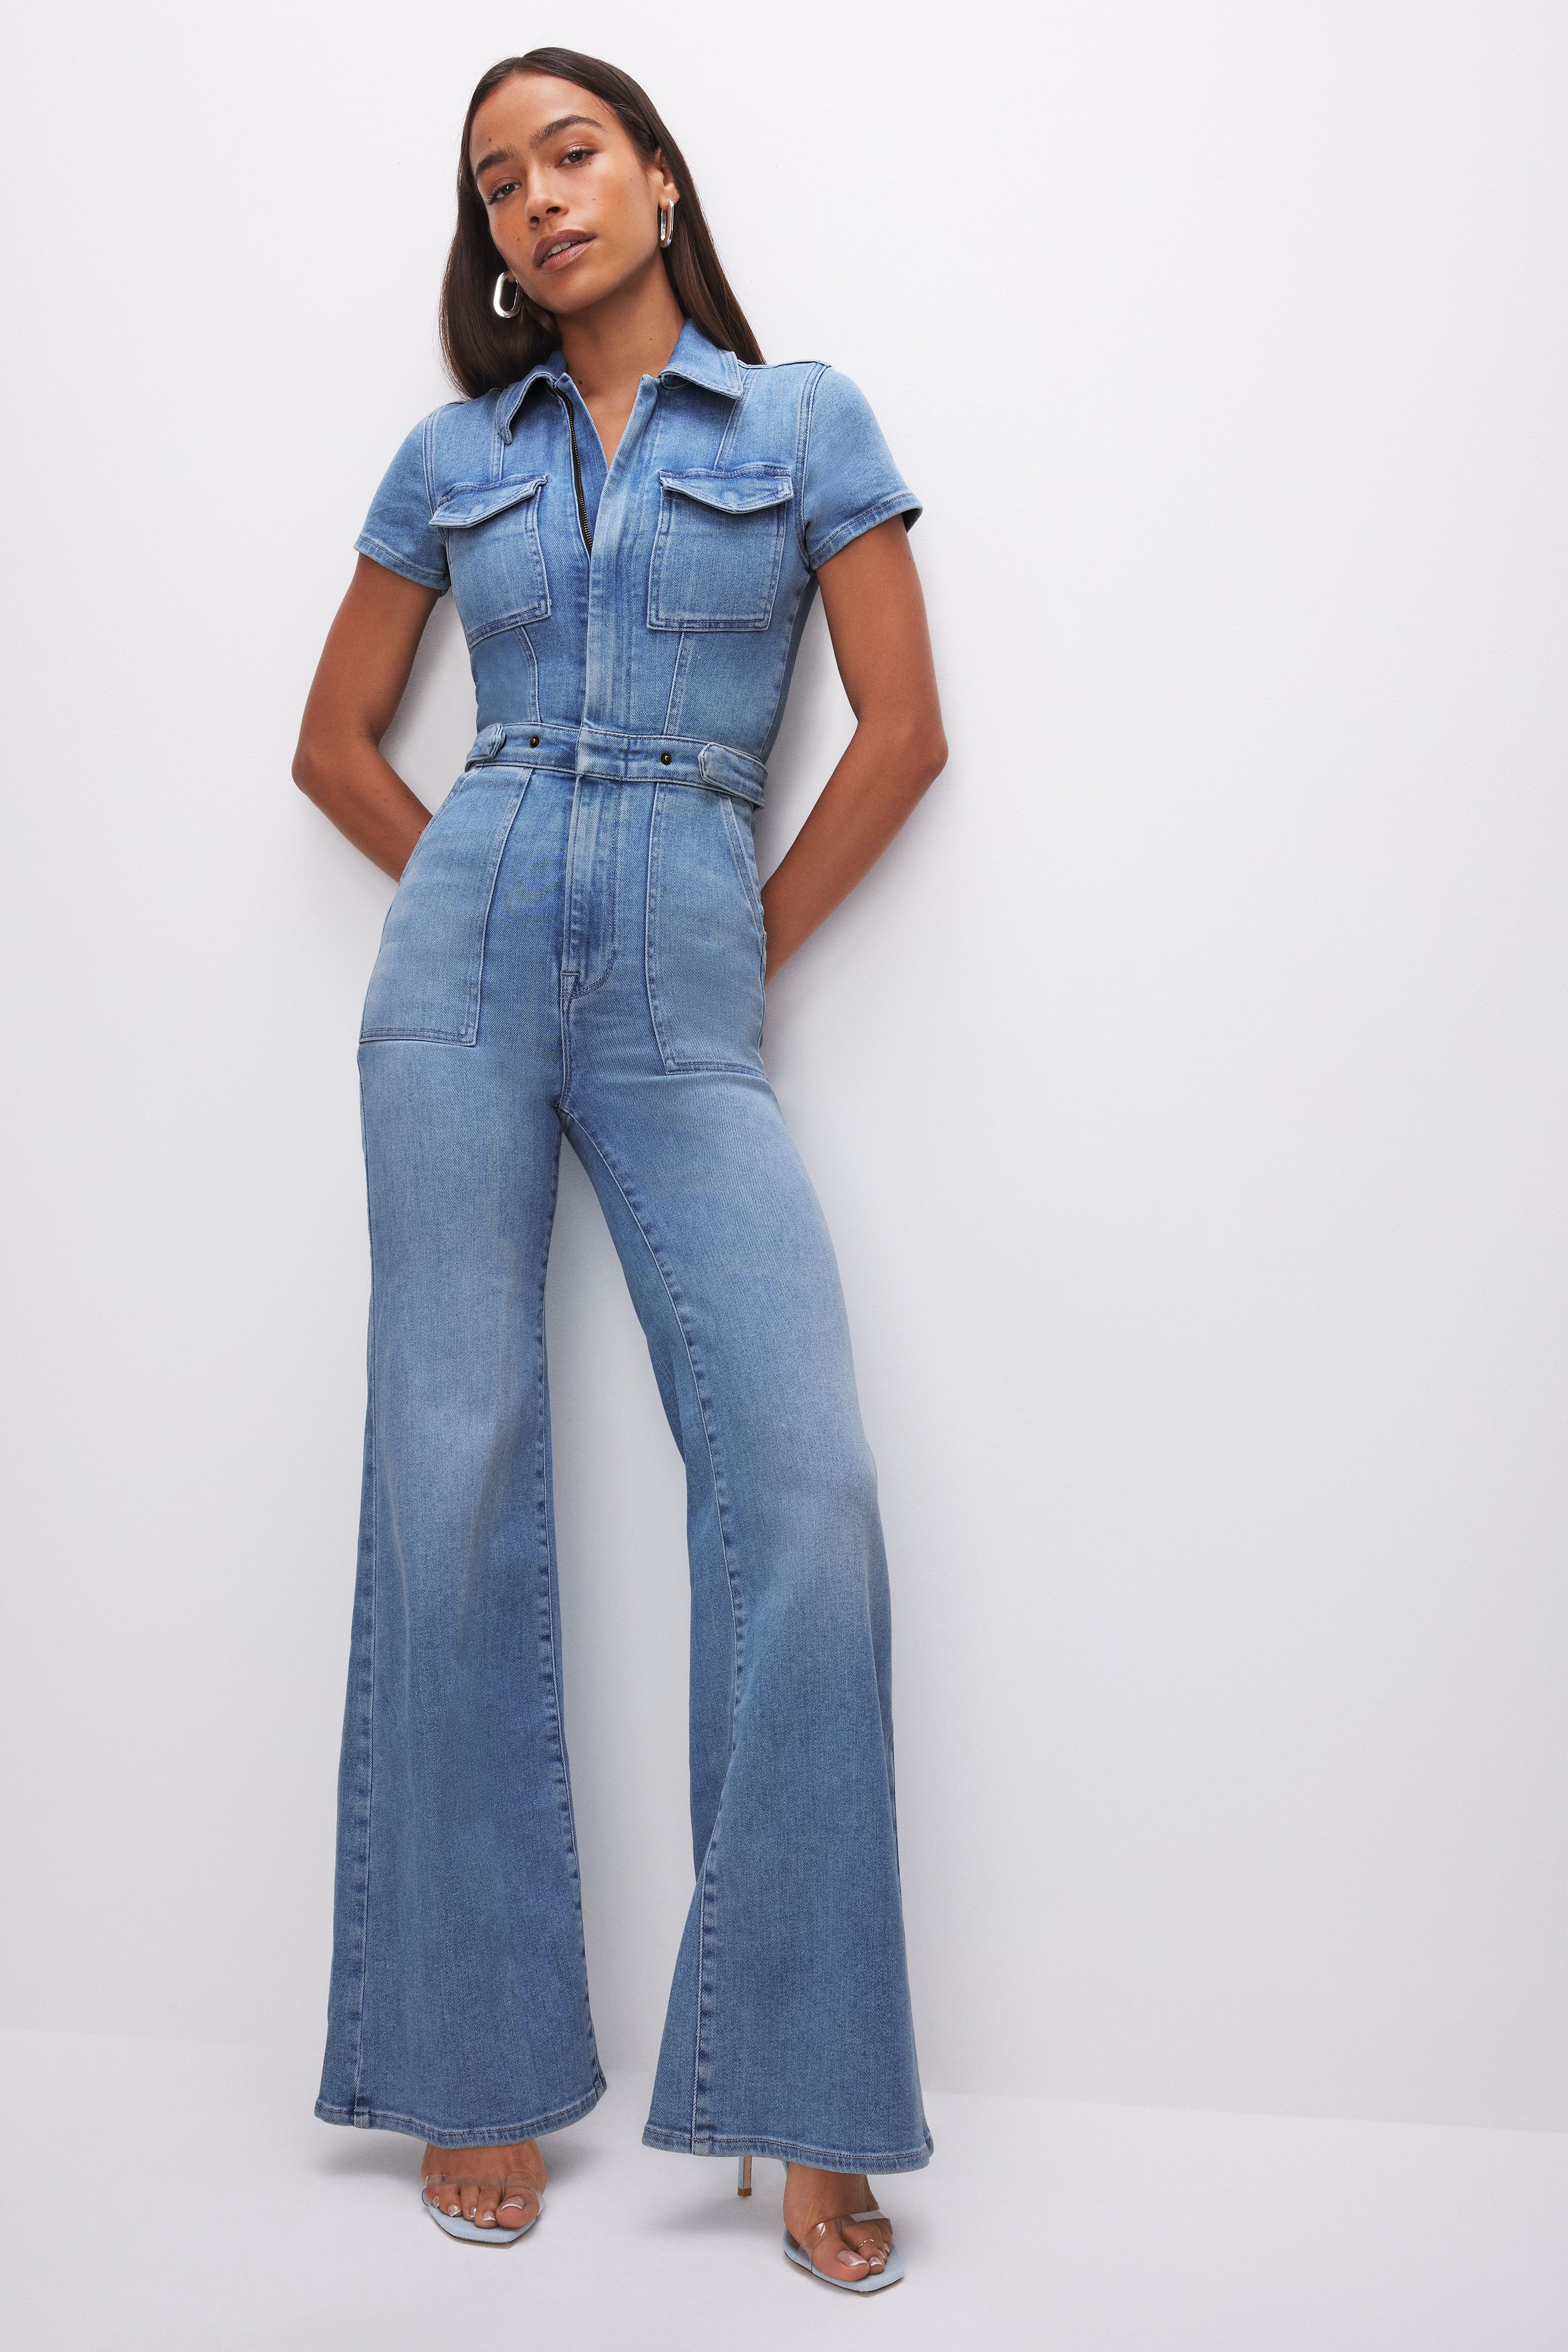 FIT FOR SUCCESS PALAZZO JUMPSUIT | BLUE274 - GOOD AMERICAN | Good American